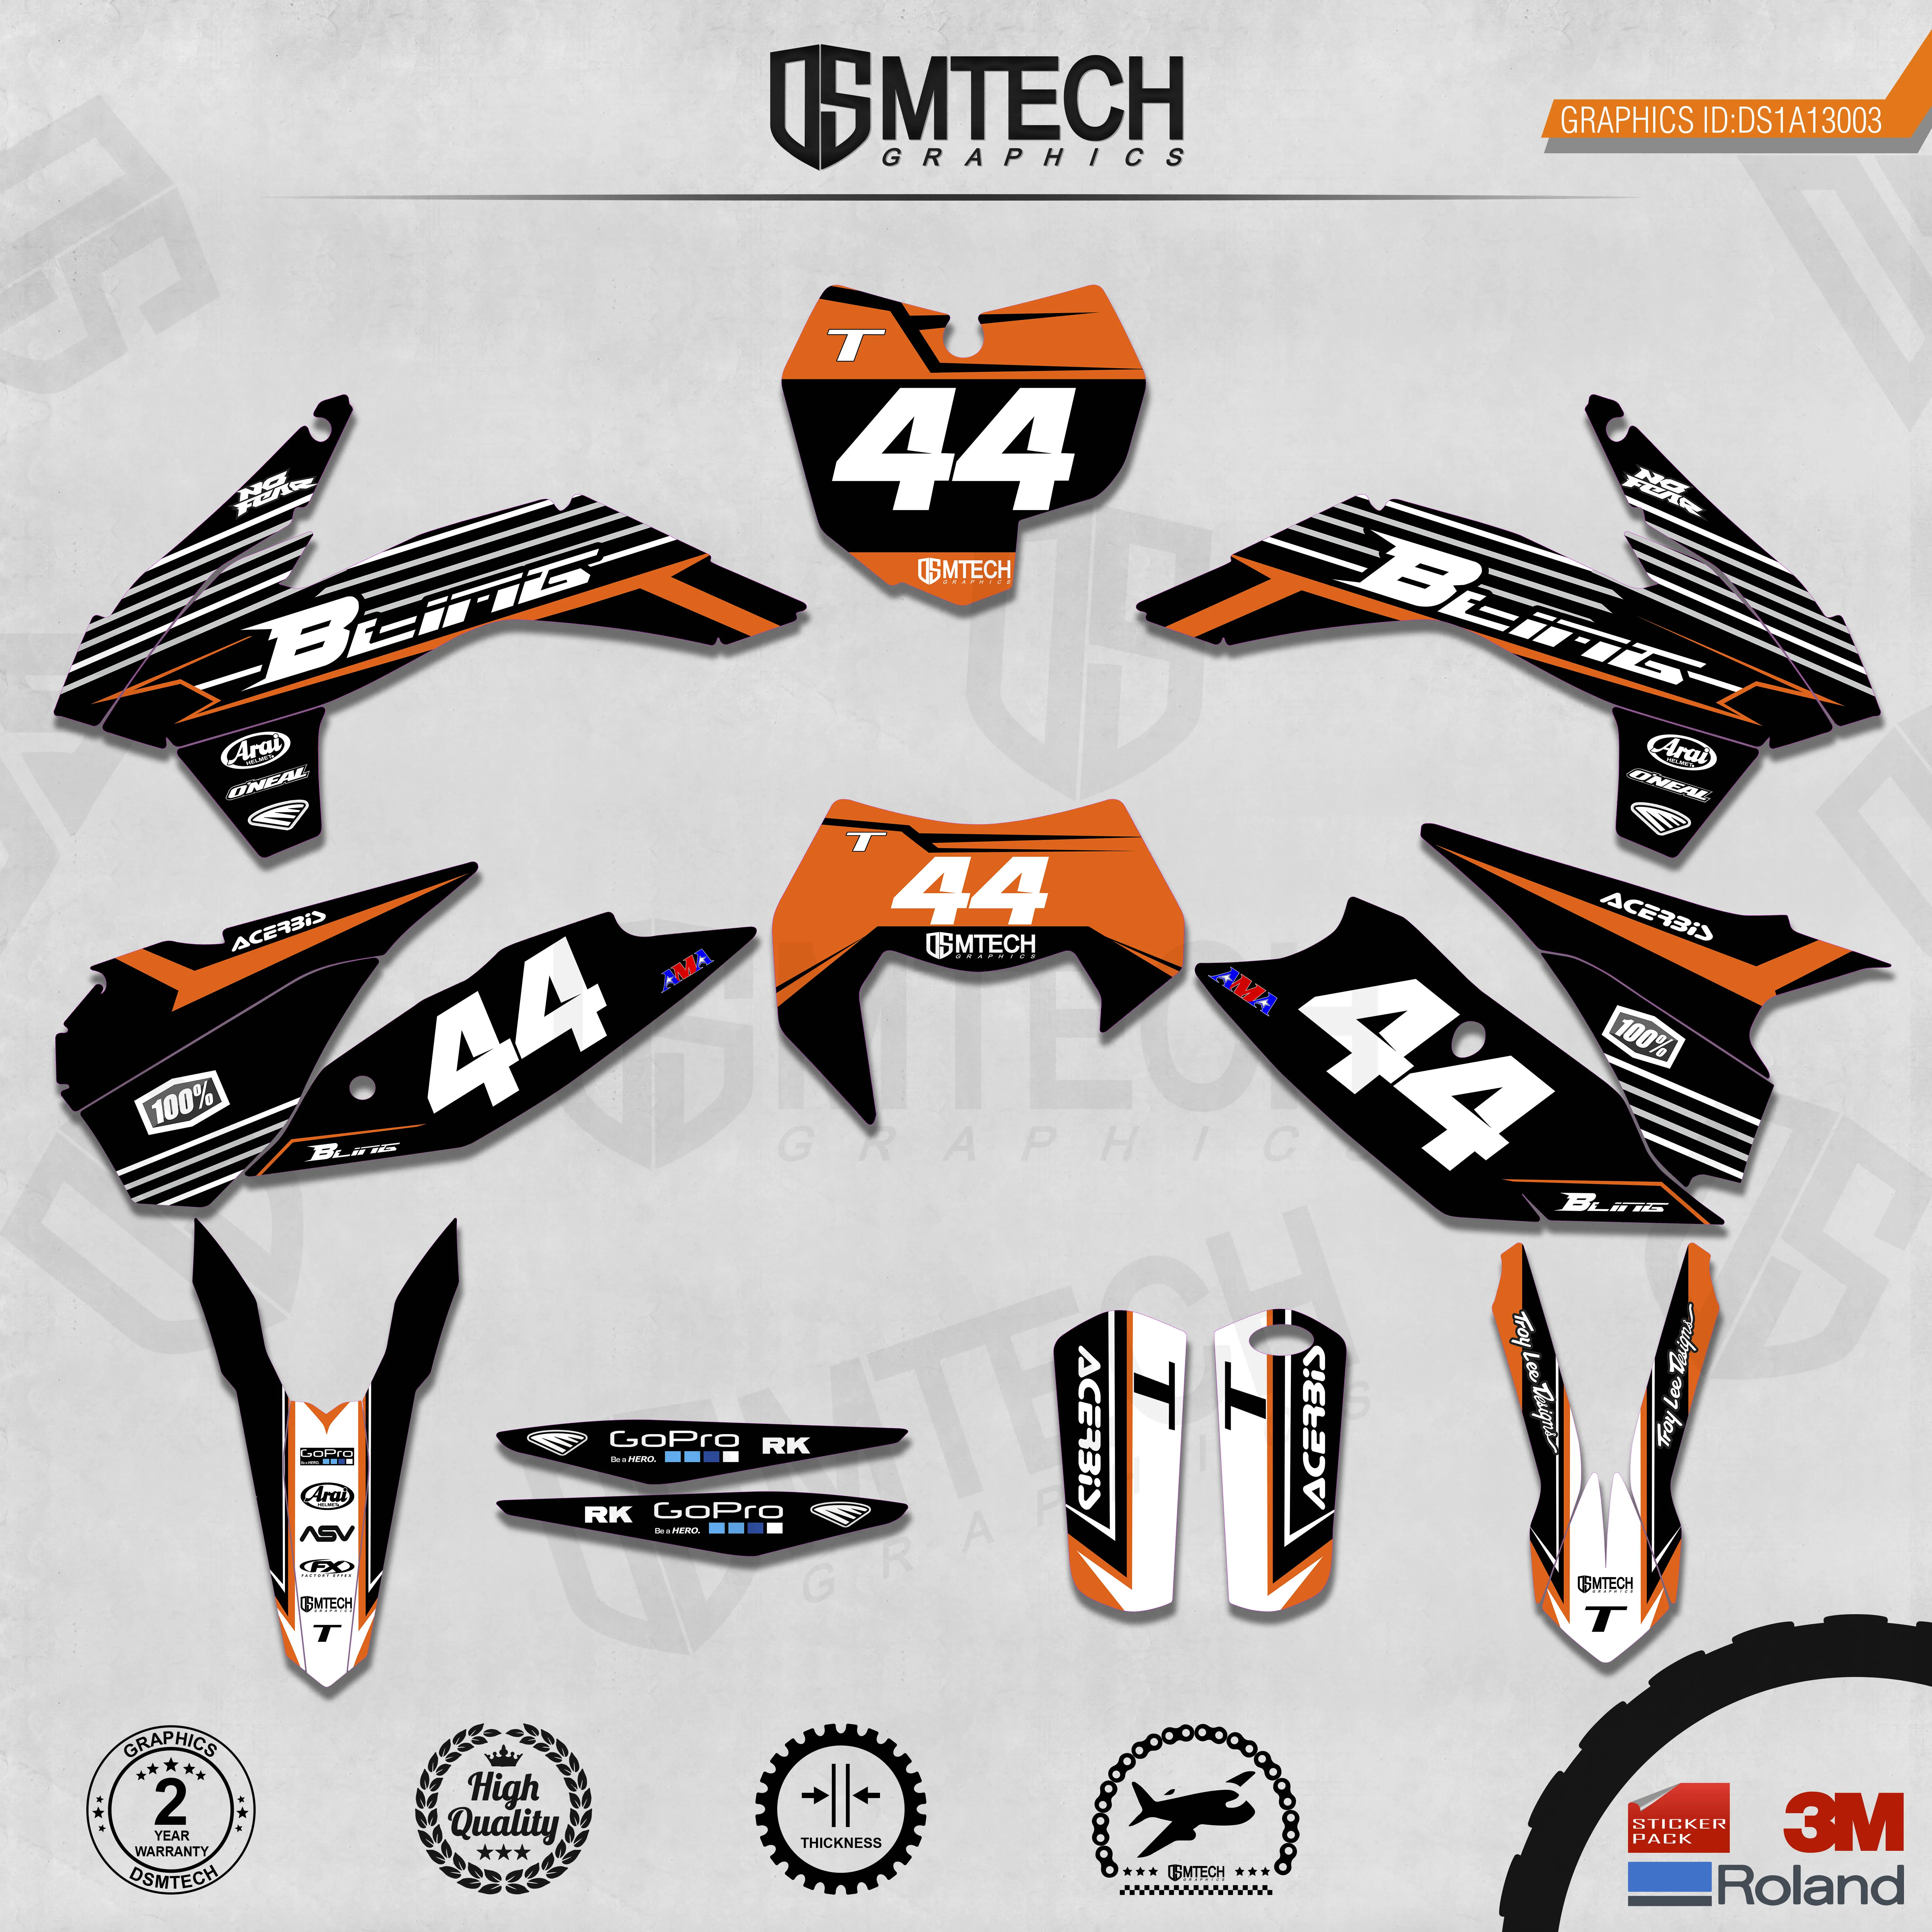 DSMTECH Customized Team Graphics Backgrounds Decals 3M Custom Stickers For 2013-2014 SXF 2015 SXF 2014-2015 EXC 2016 EXC  003